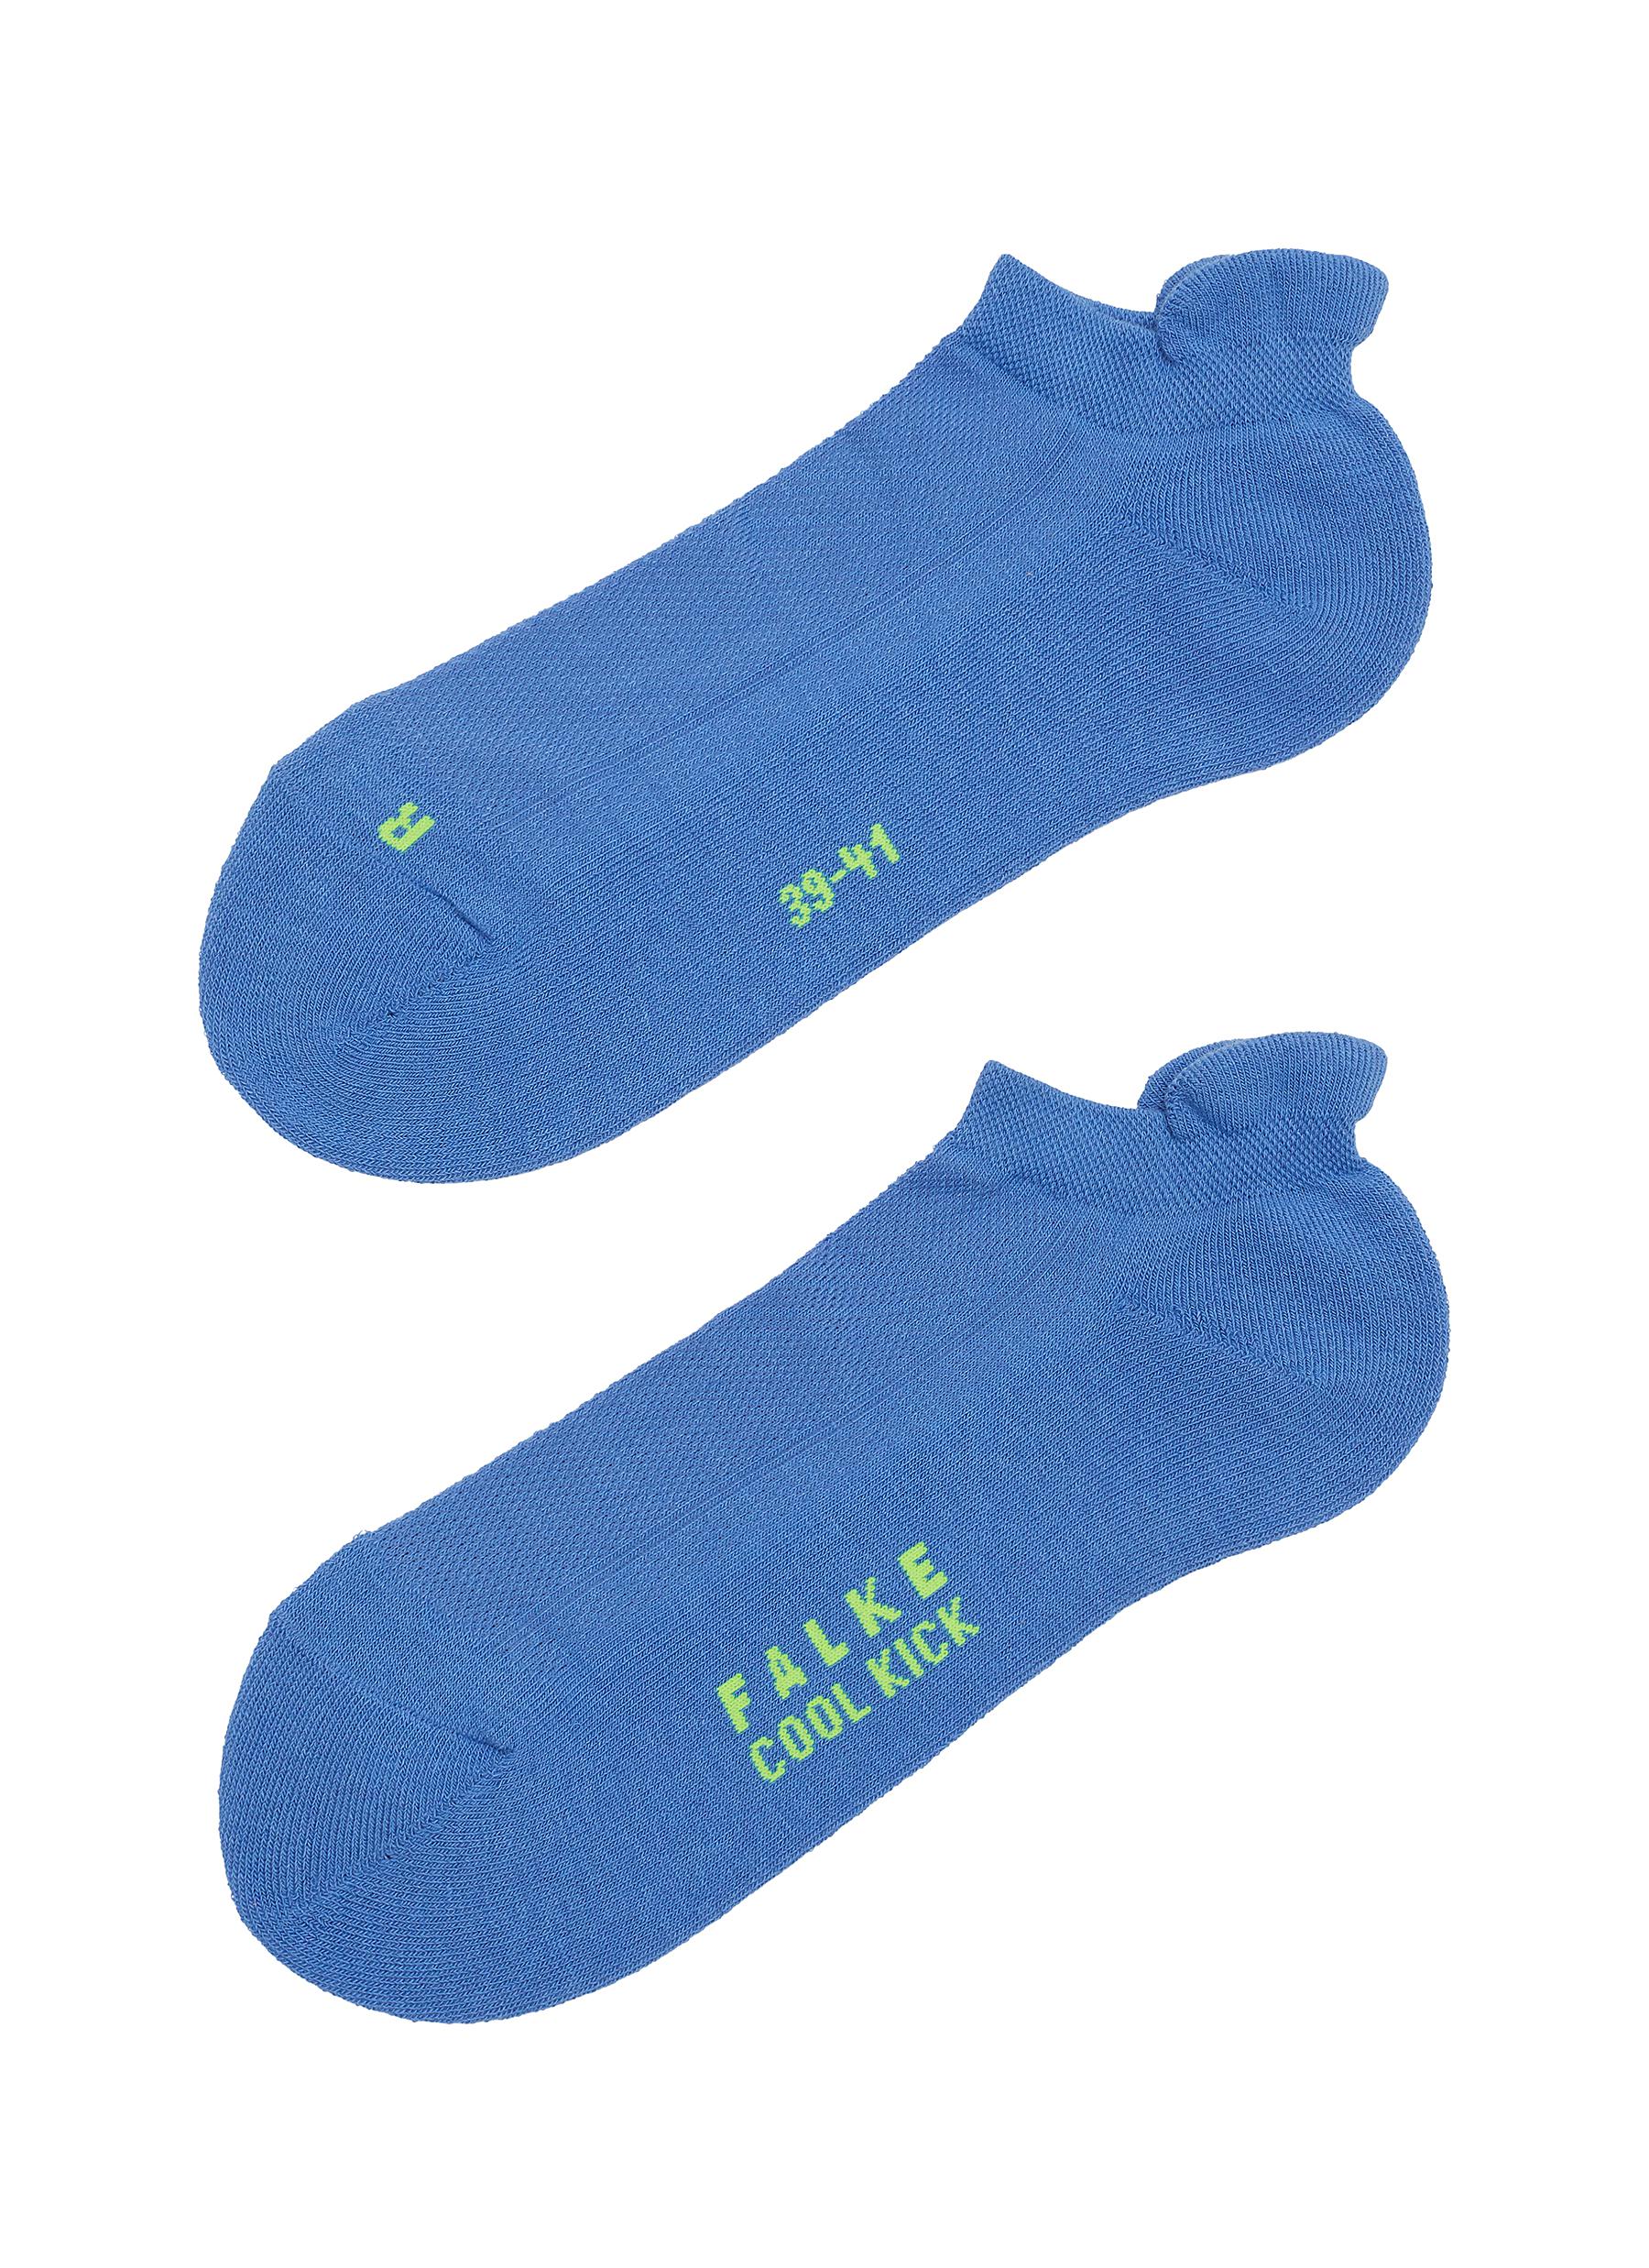 â€˜COOL KICK INVISIBLE’ SNEAKER ANKLE SOCKS